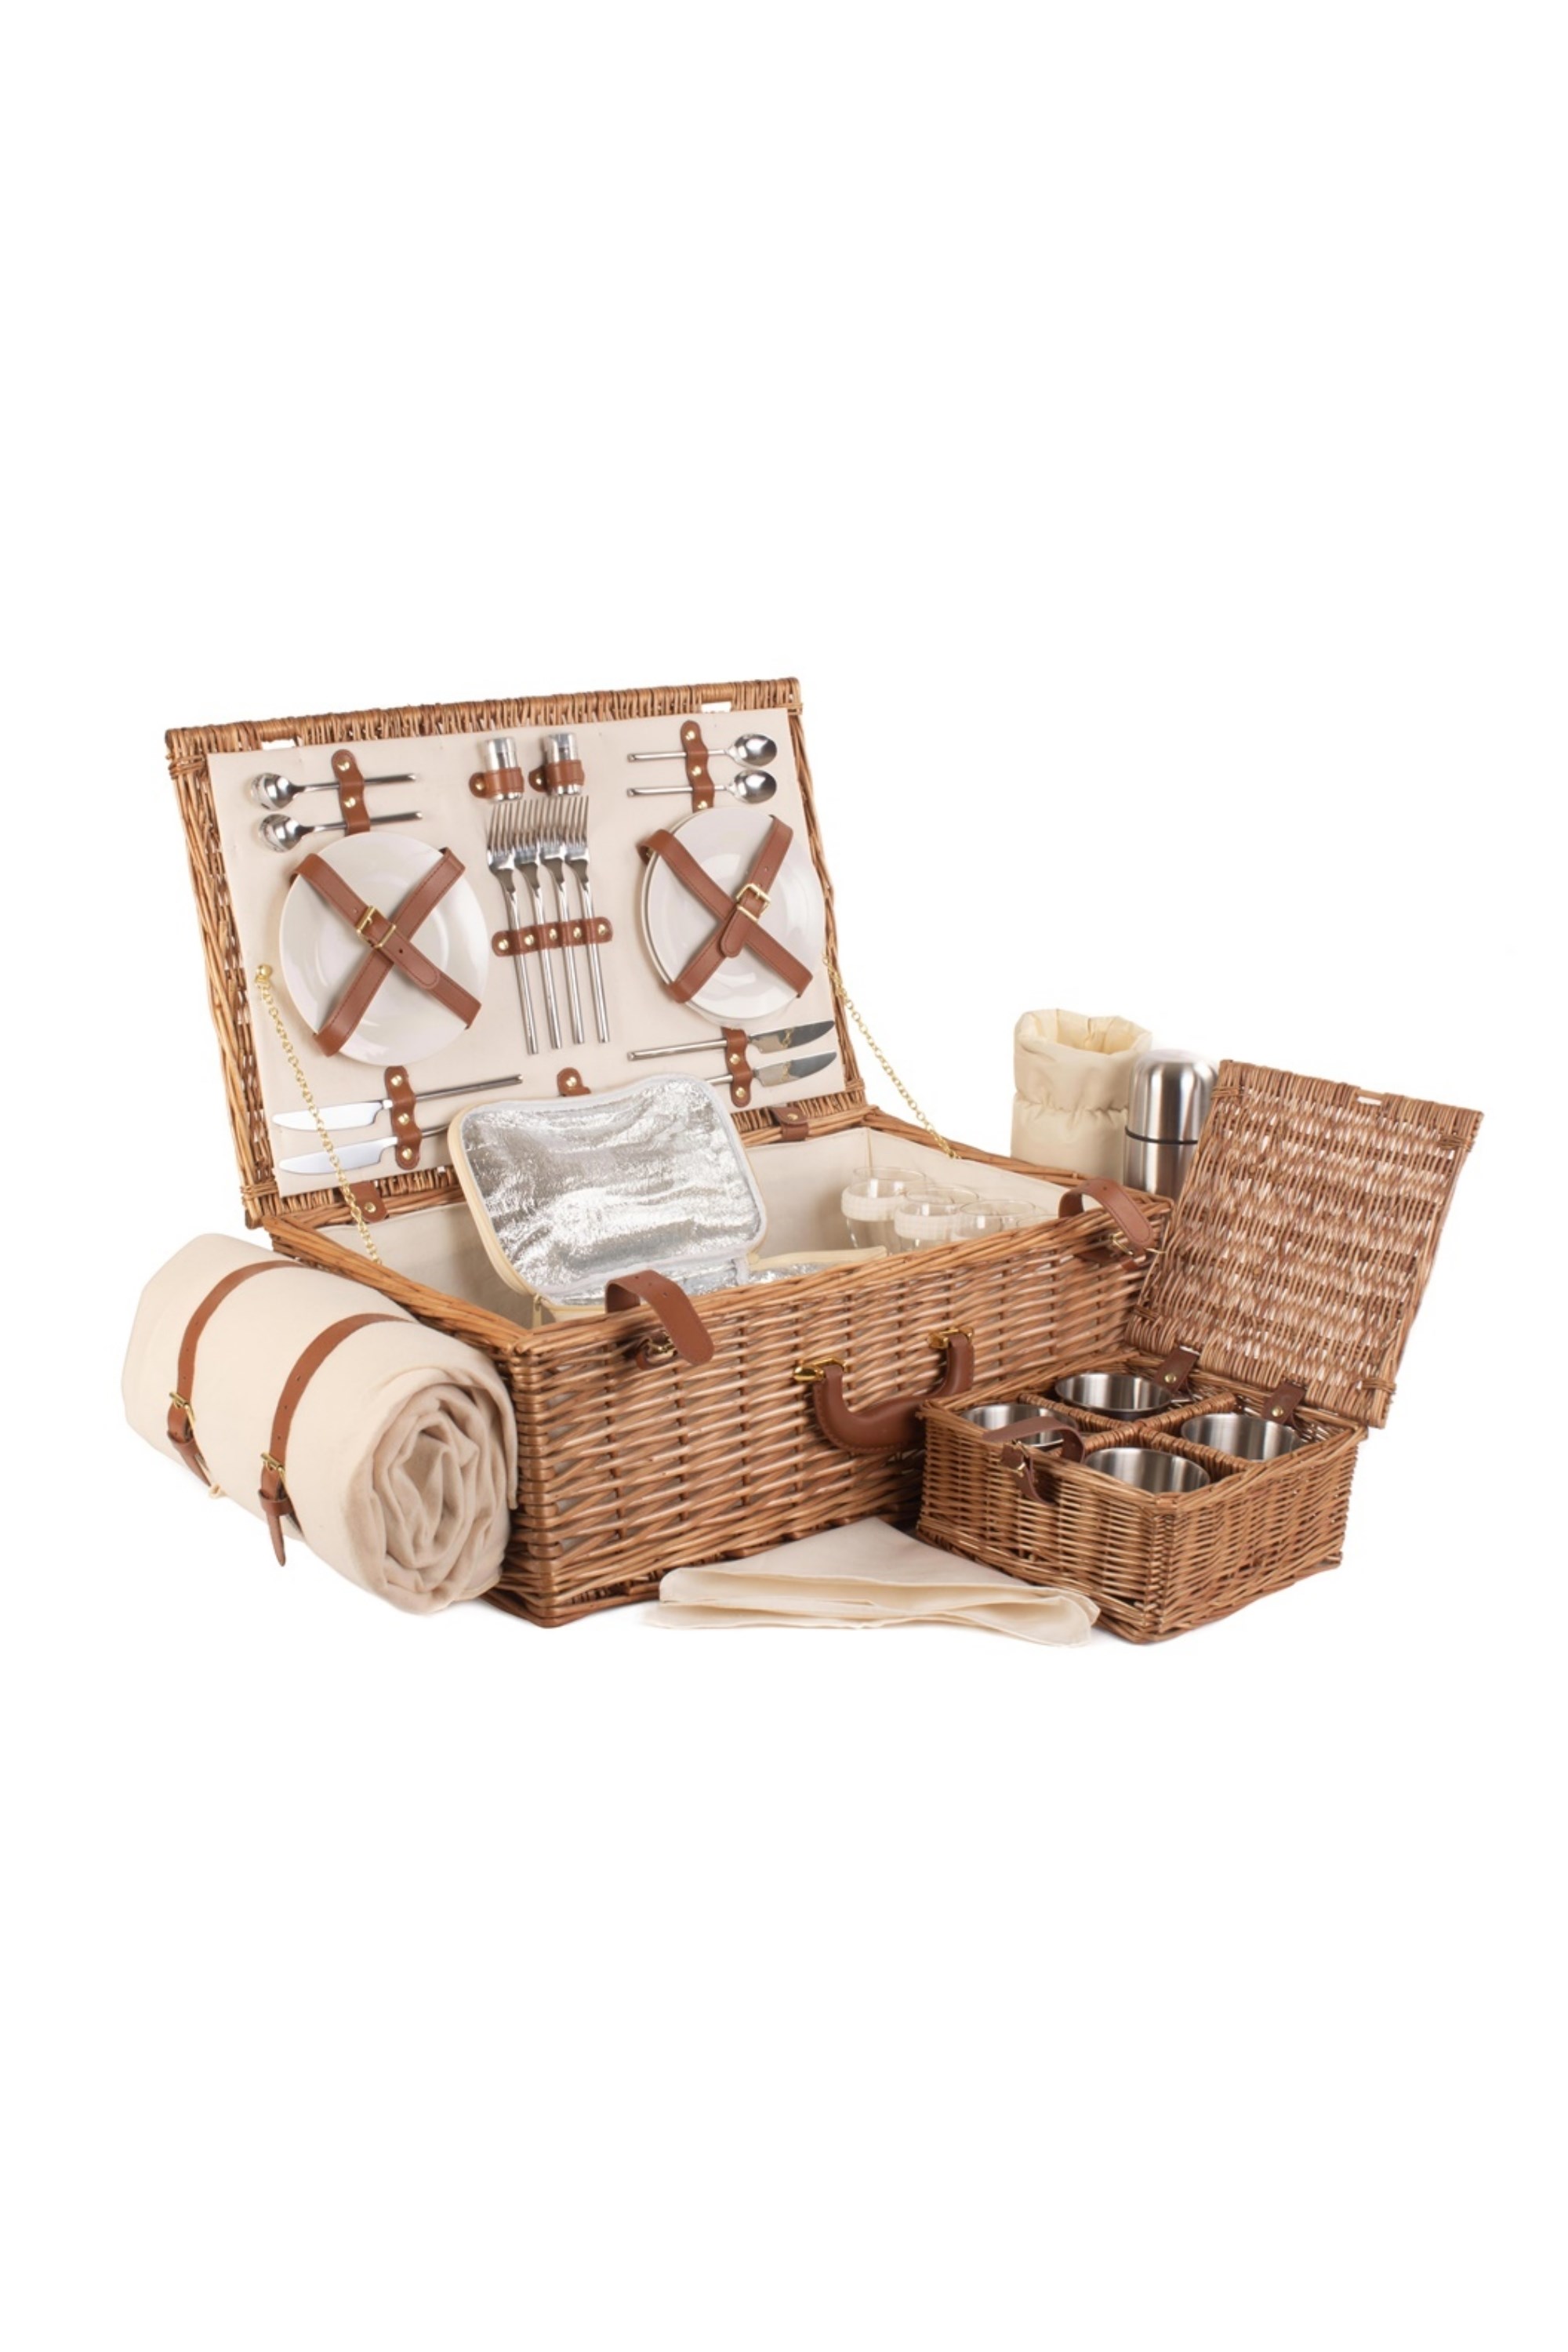 Wicker Deluxe 4 Person Traditional Picnic Basket -